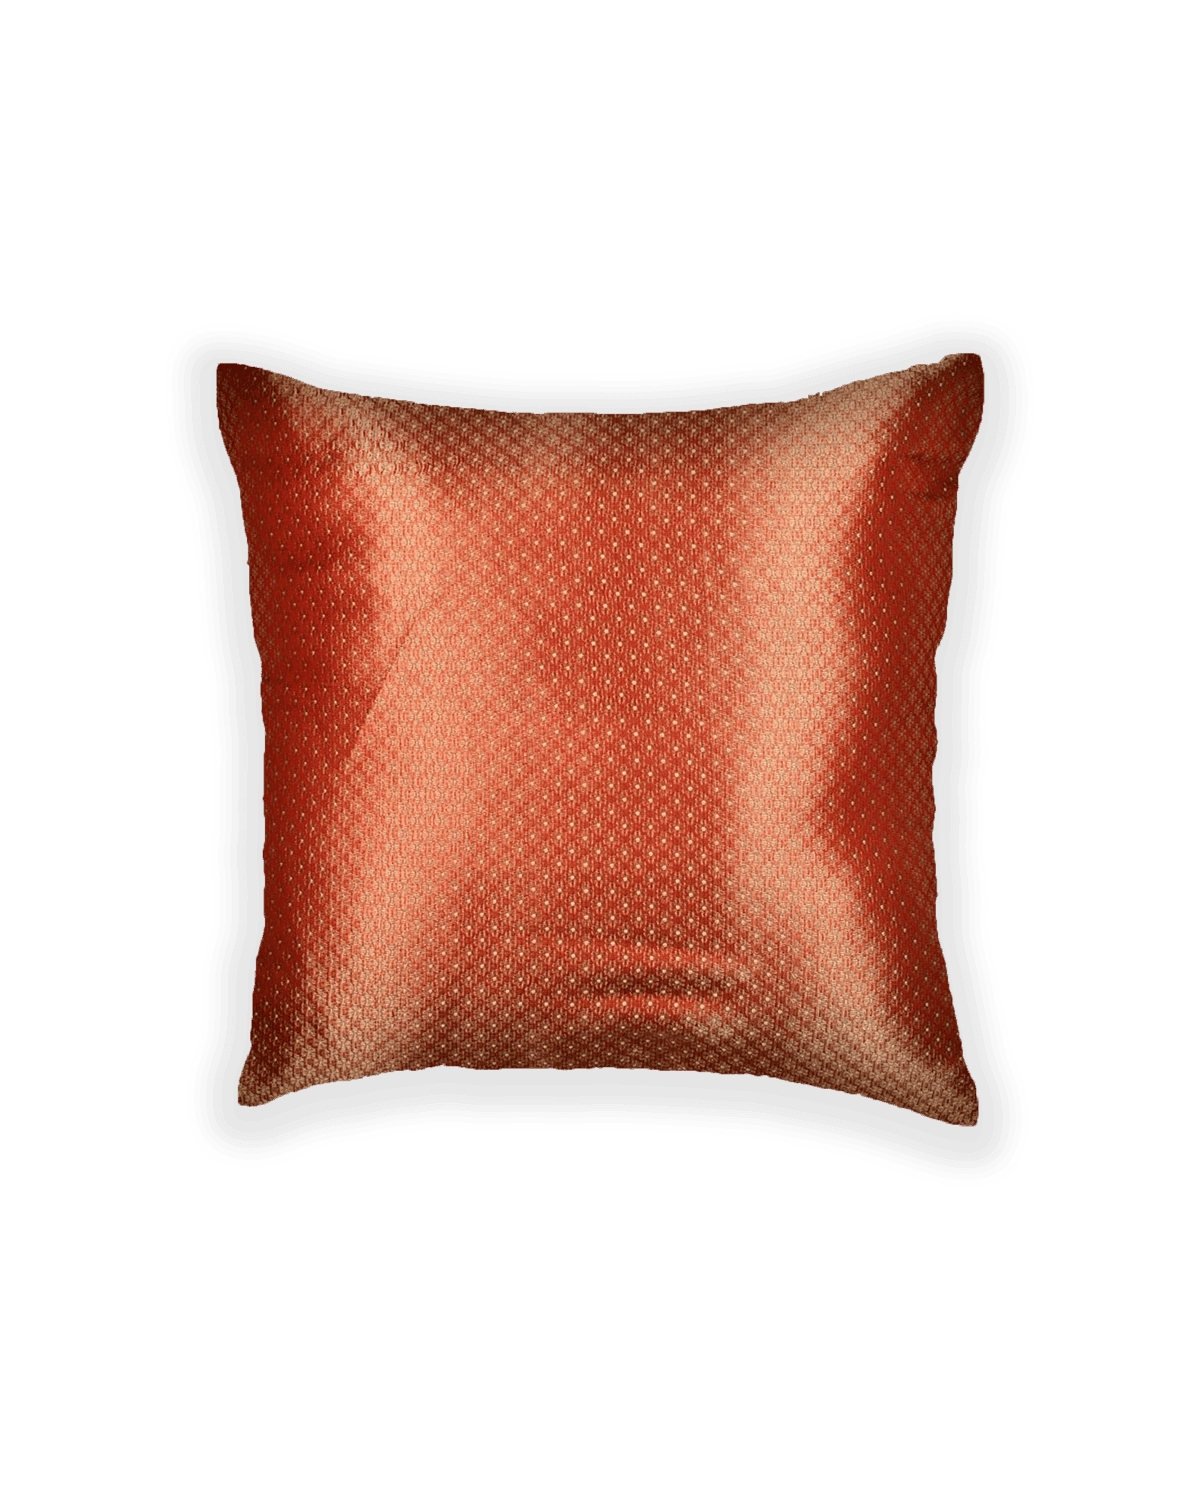 Metallic Red Brocade Woven Poly Cotton Tissue Cushion Cover with Satin Back 16" - By HolyWeaves, Benares